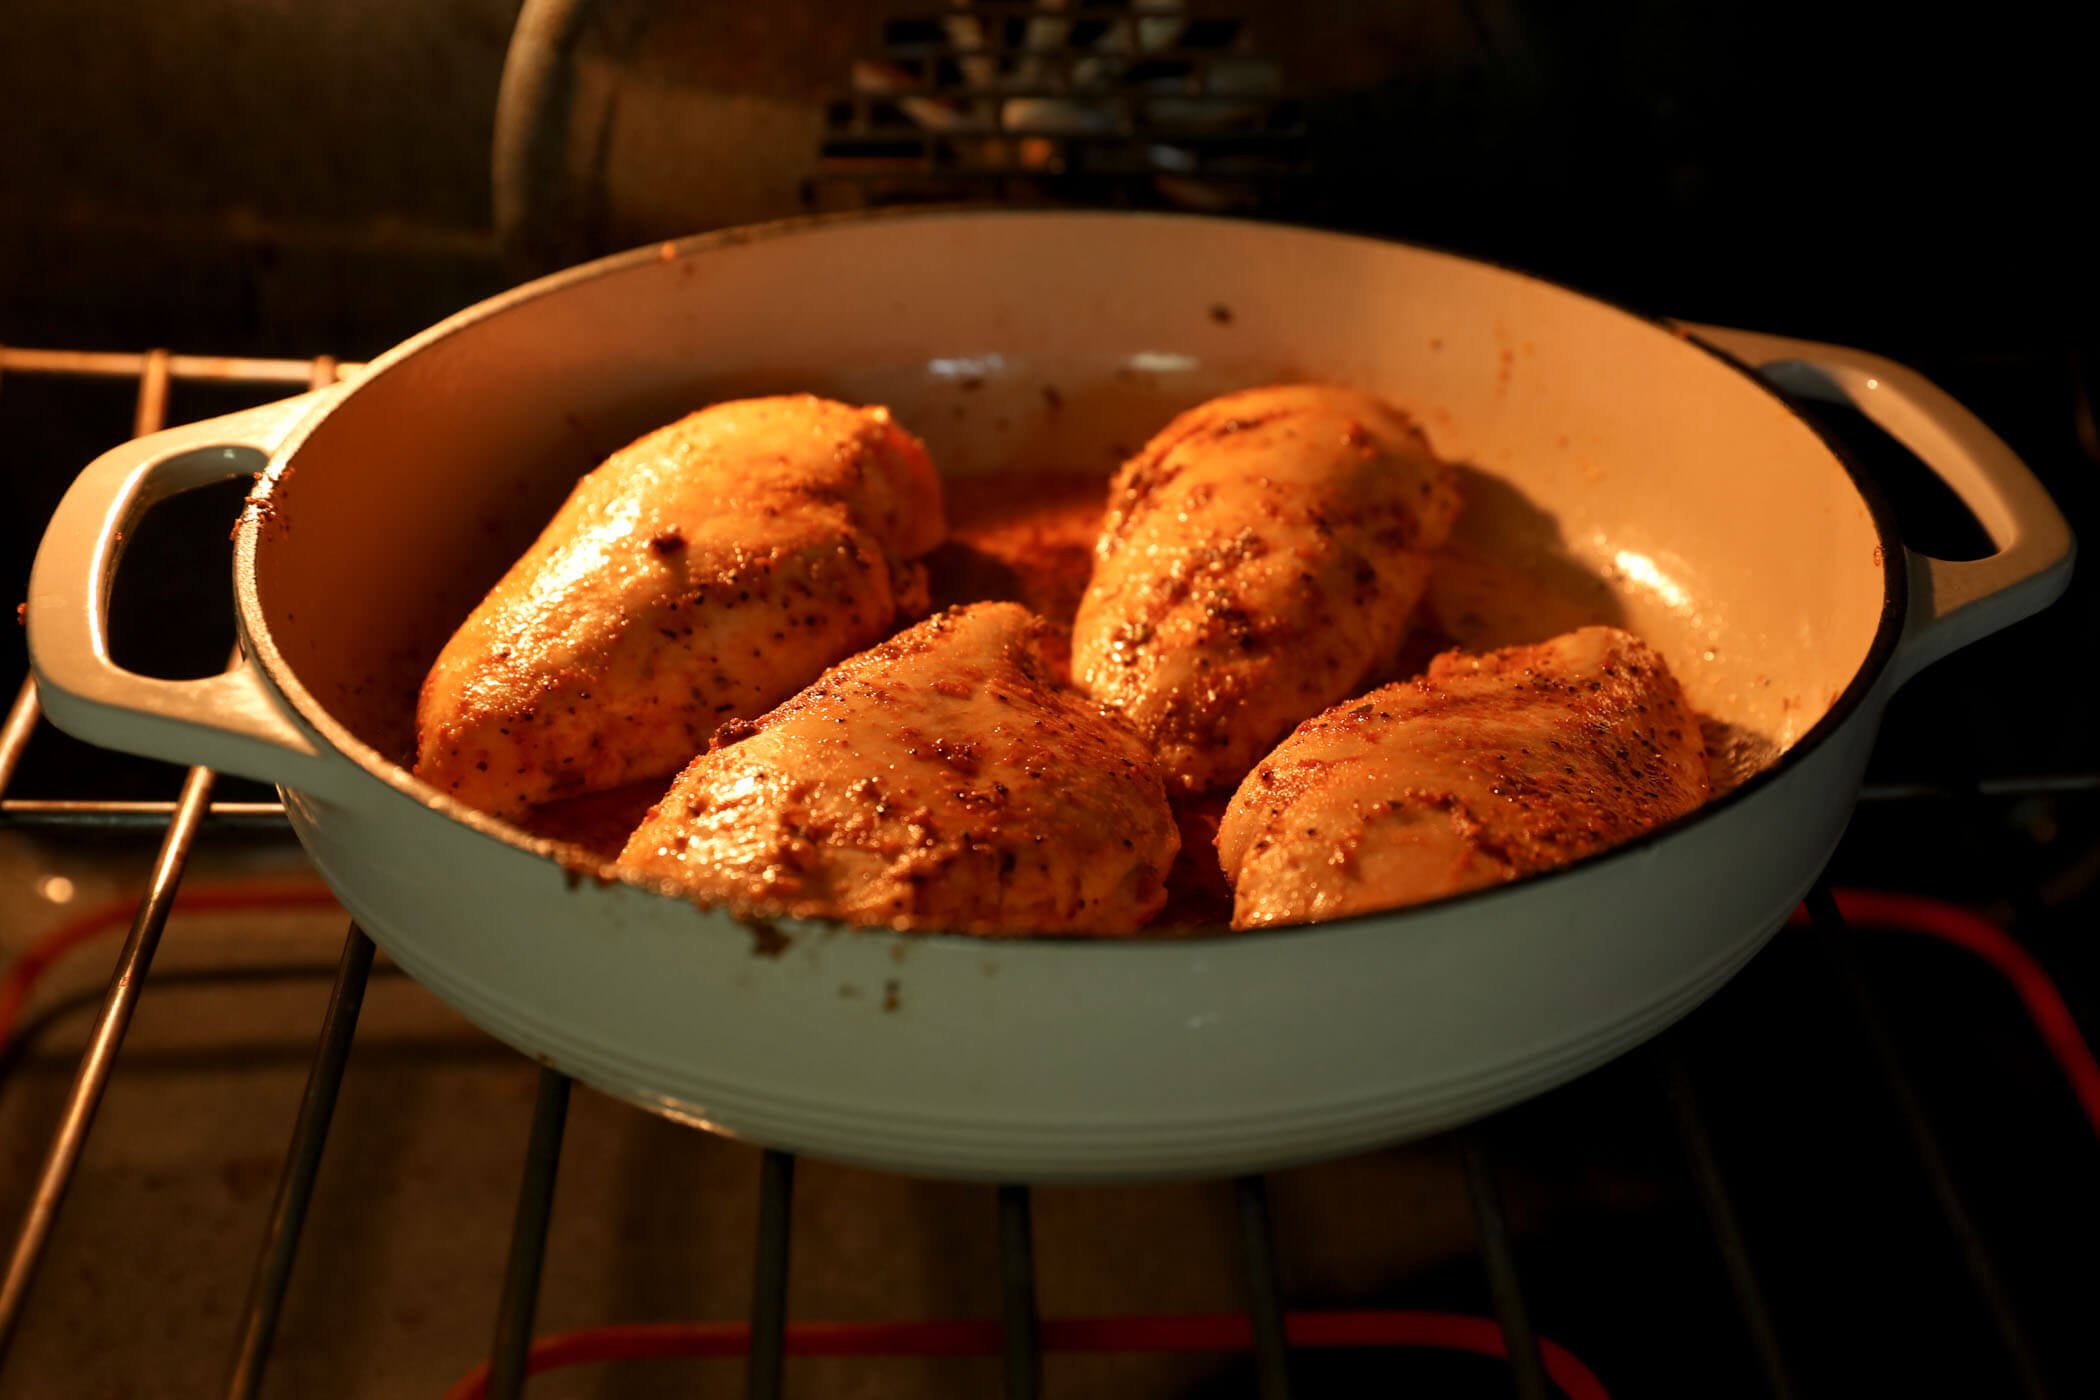 Cast Iron Skillet Chicken Breast - Eats by April